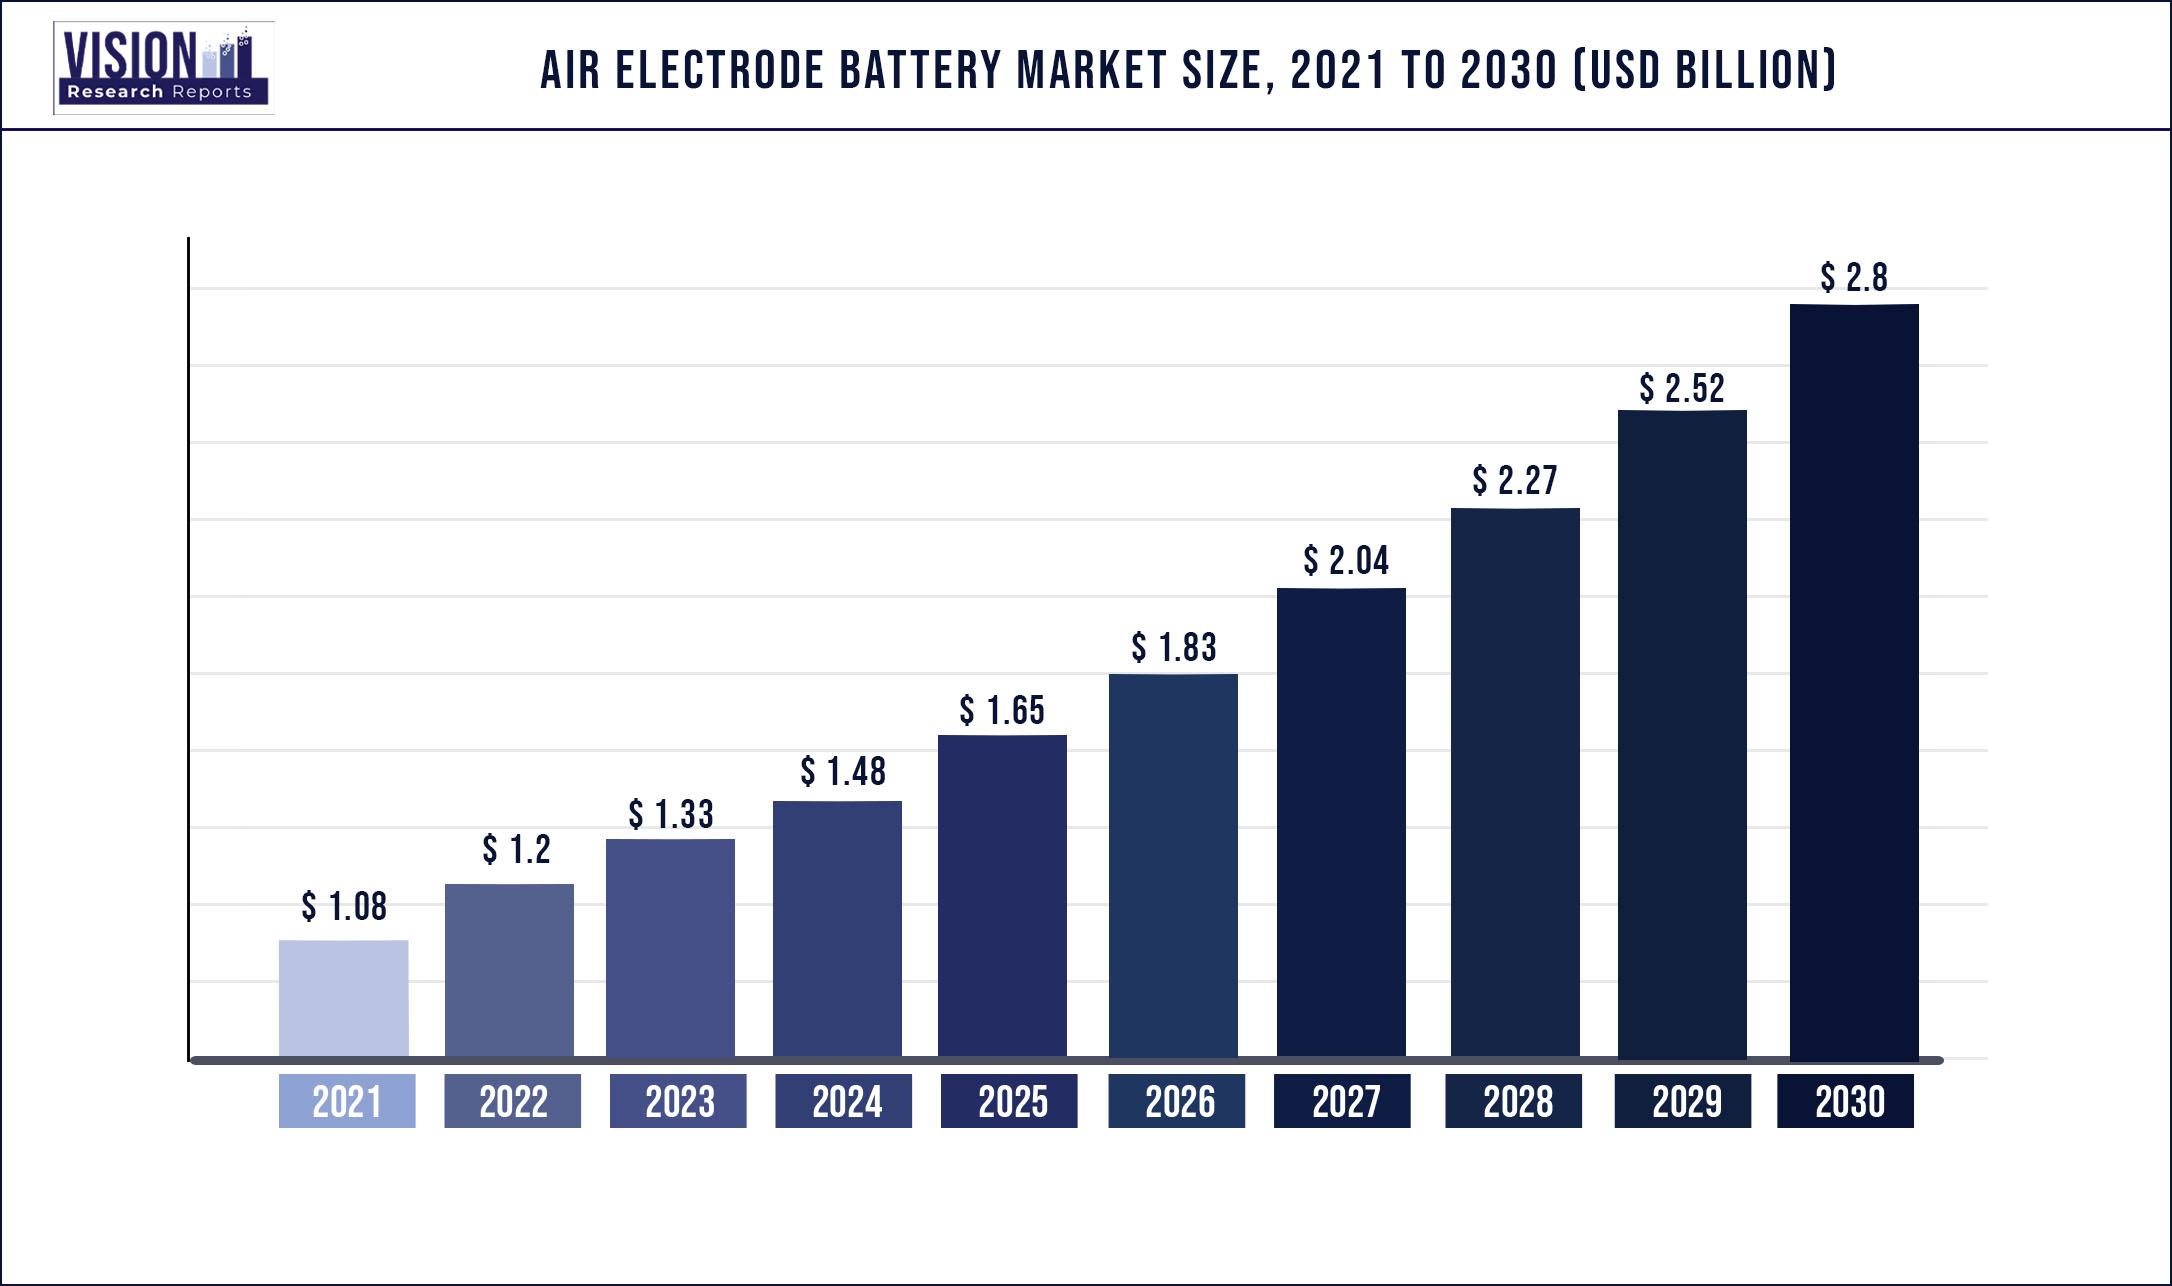 Air Electrode Battery Market Size 2021 to 2030